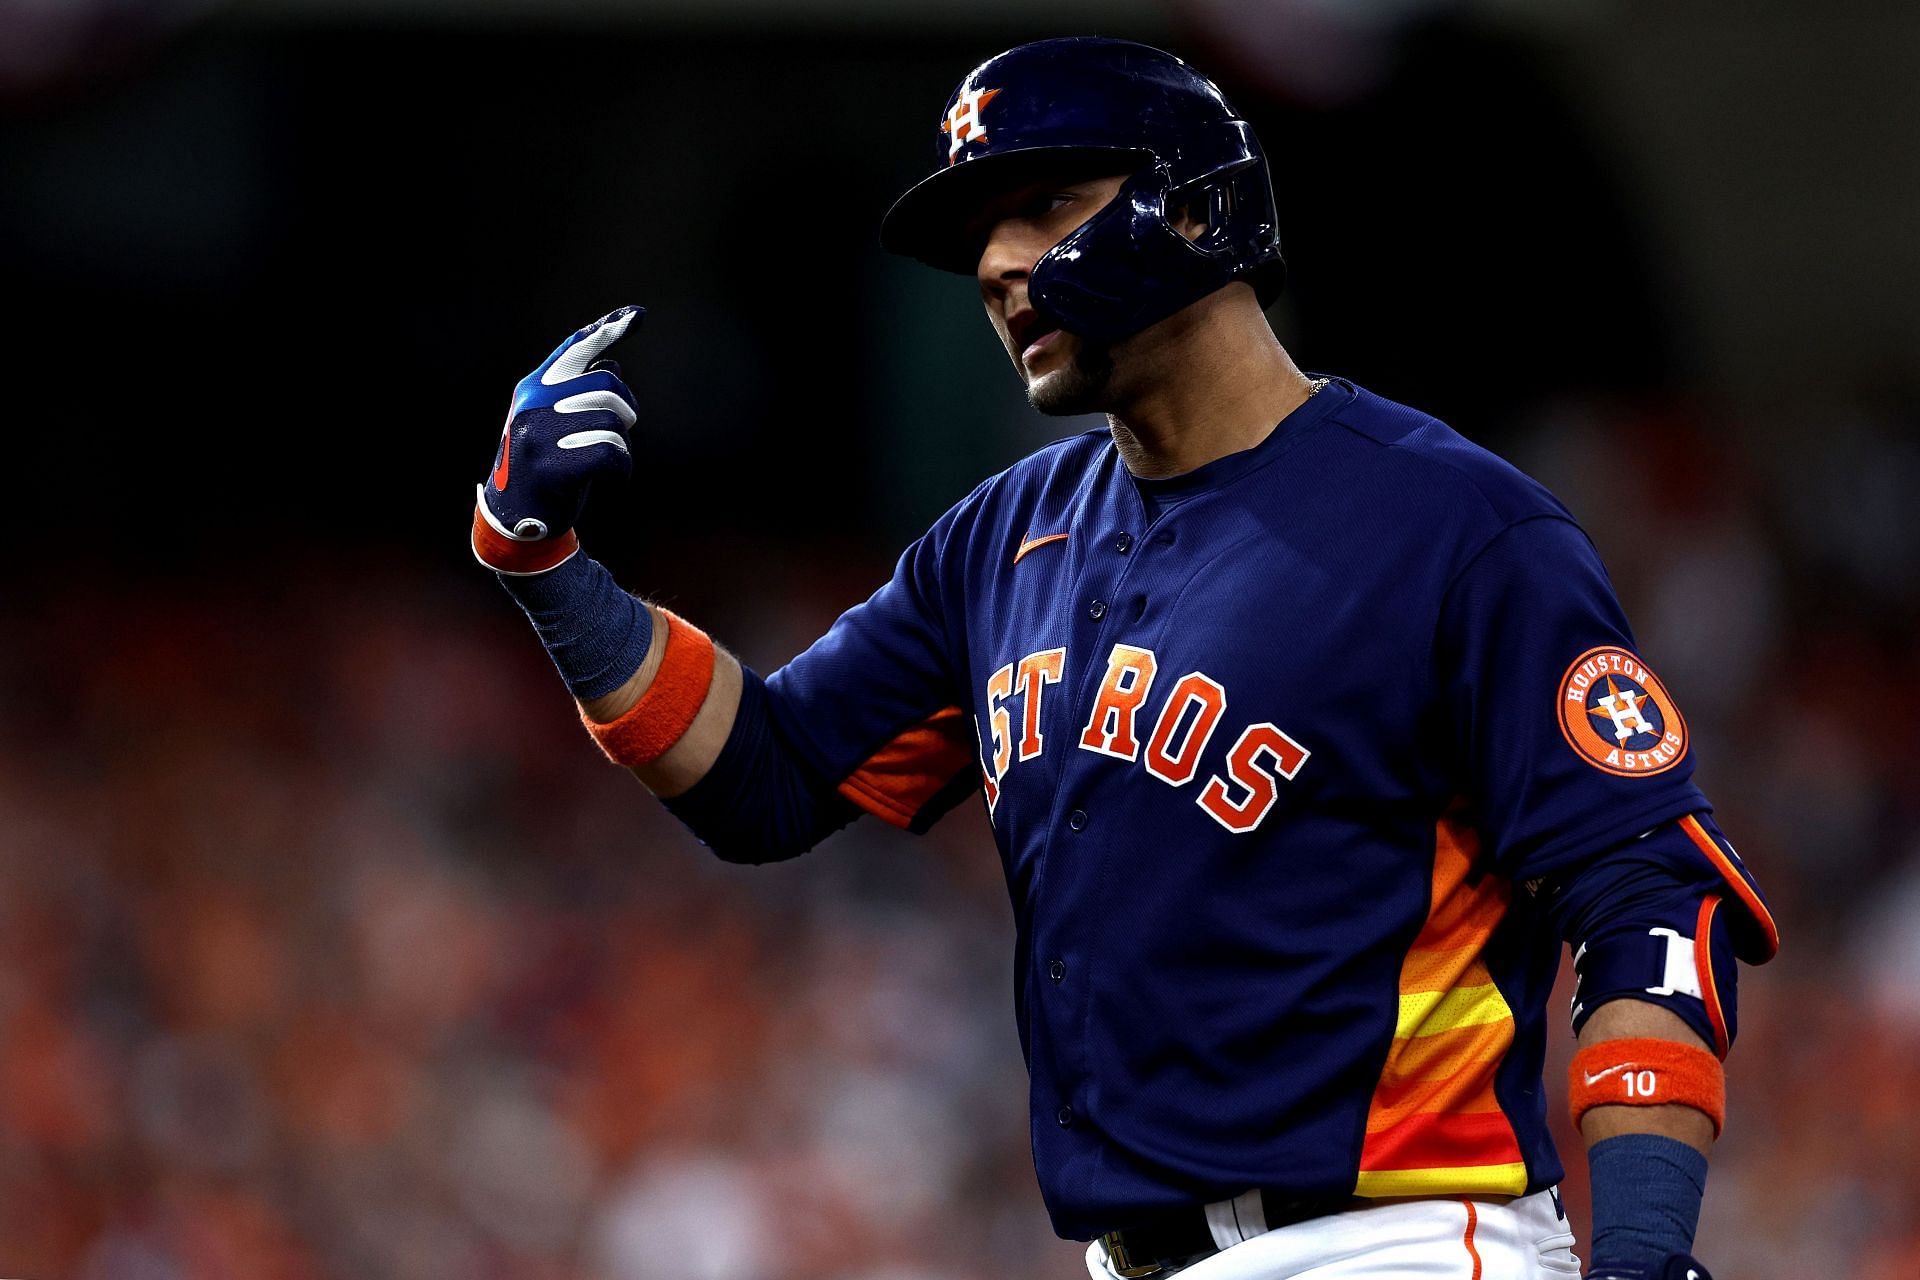 Marlins reportedly had interest in 1B Gurriel